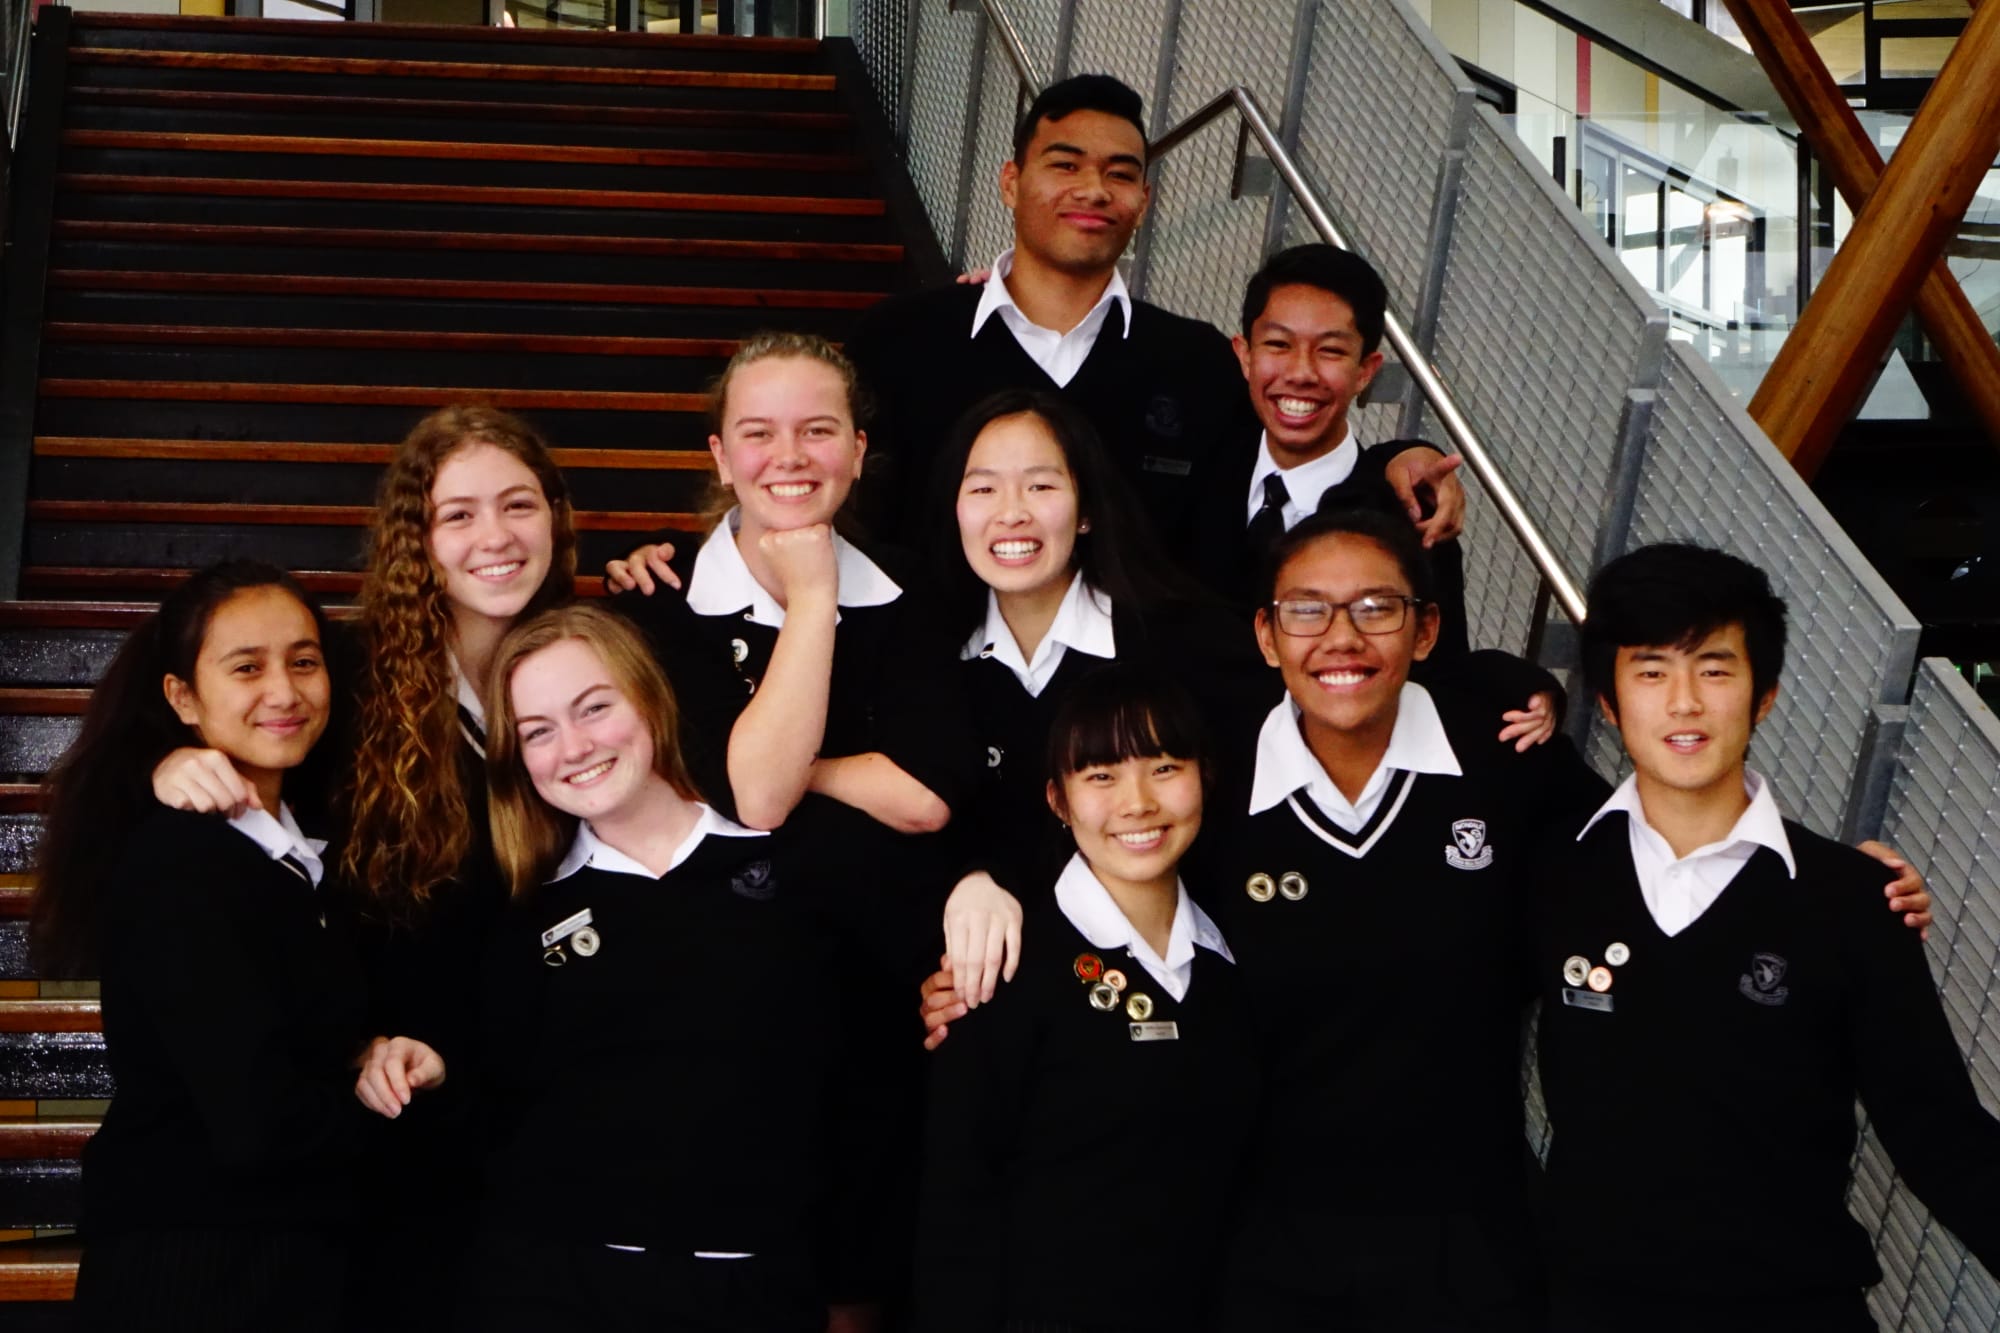 There are 30 different ethnicities represented at Auckland's Avondale College